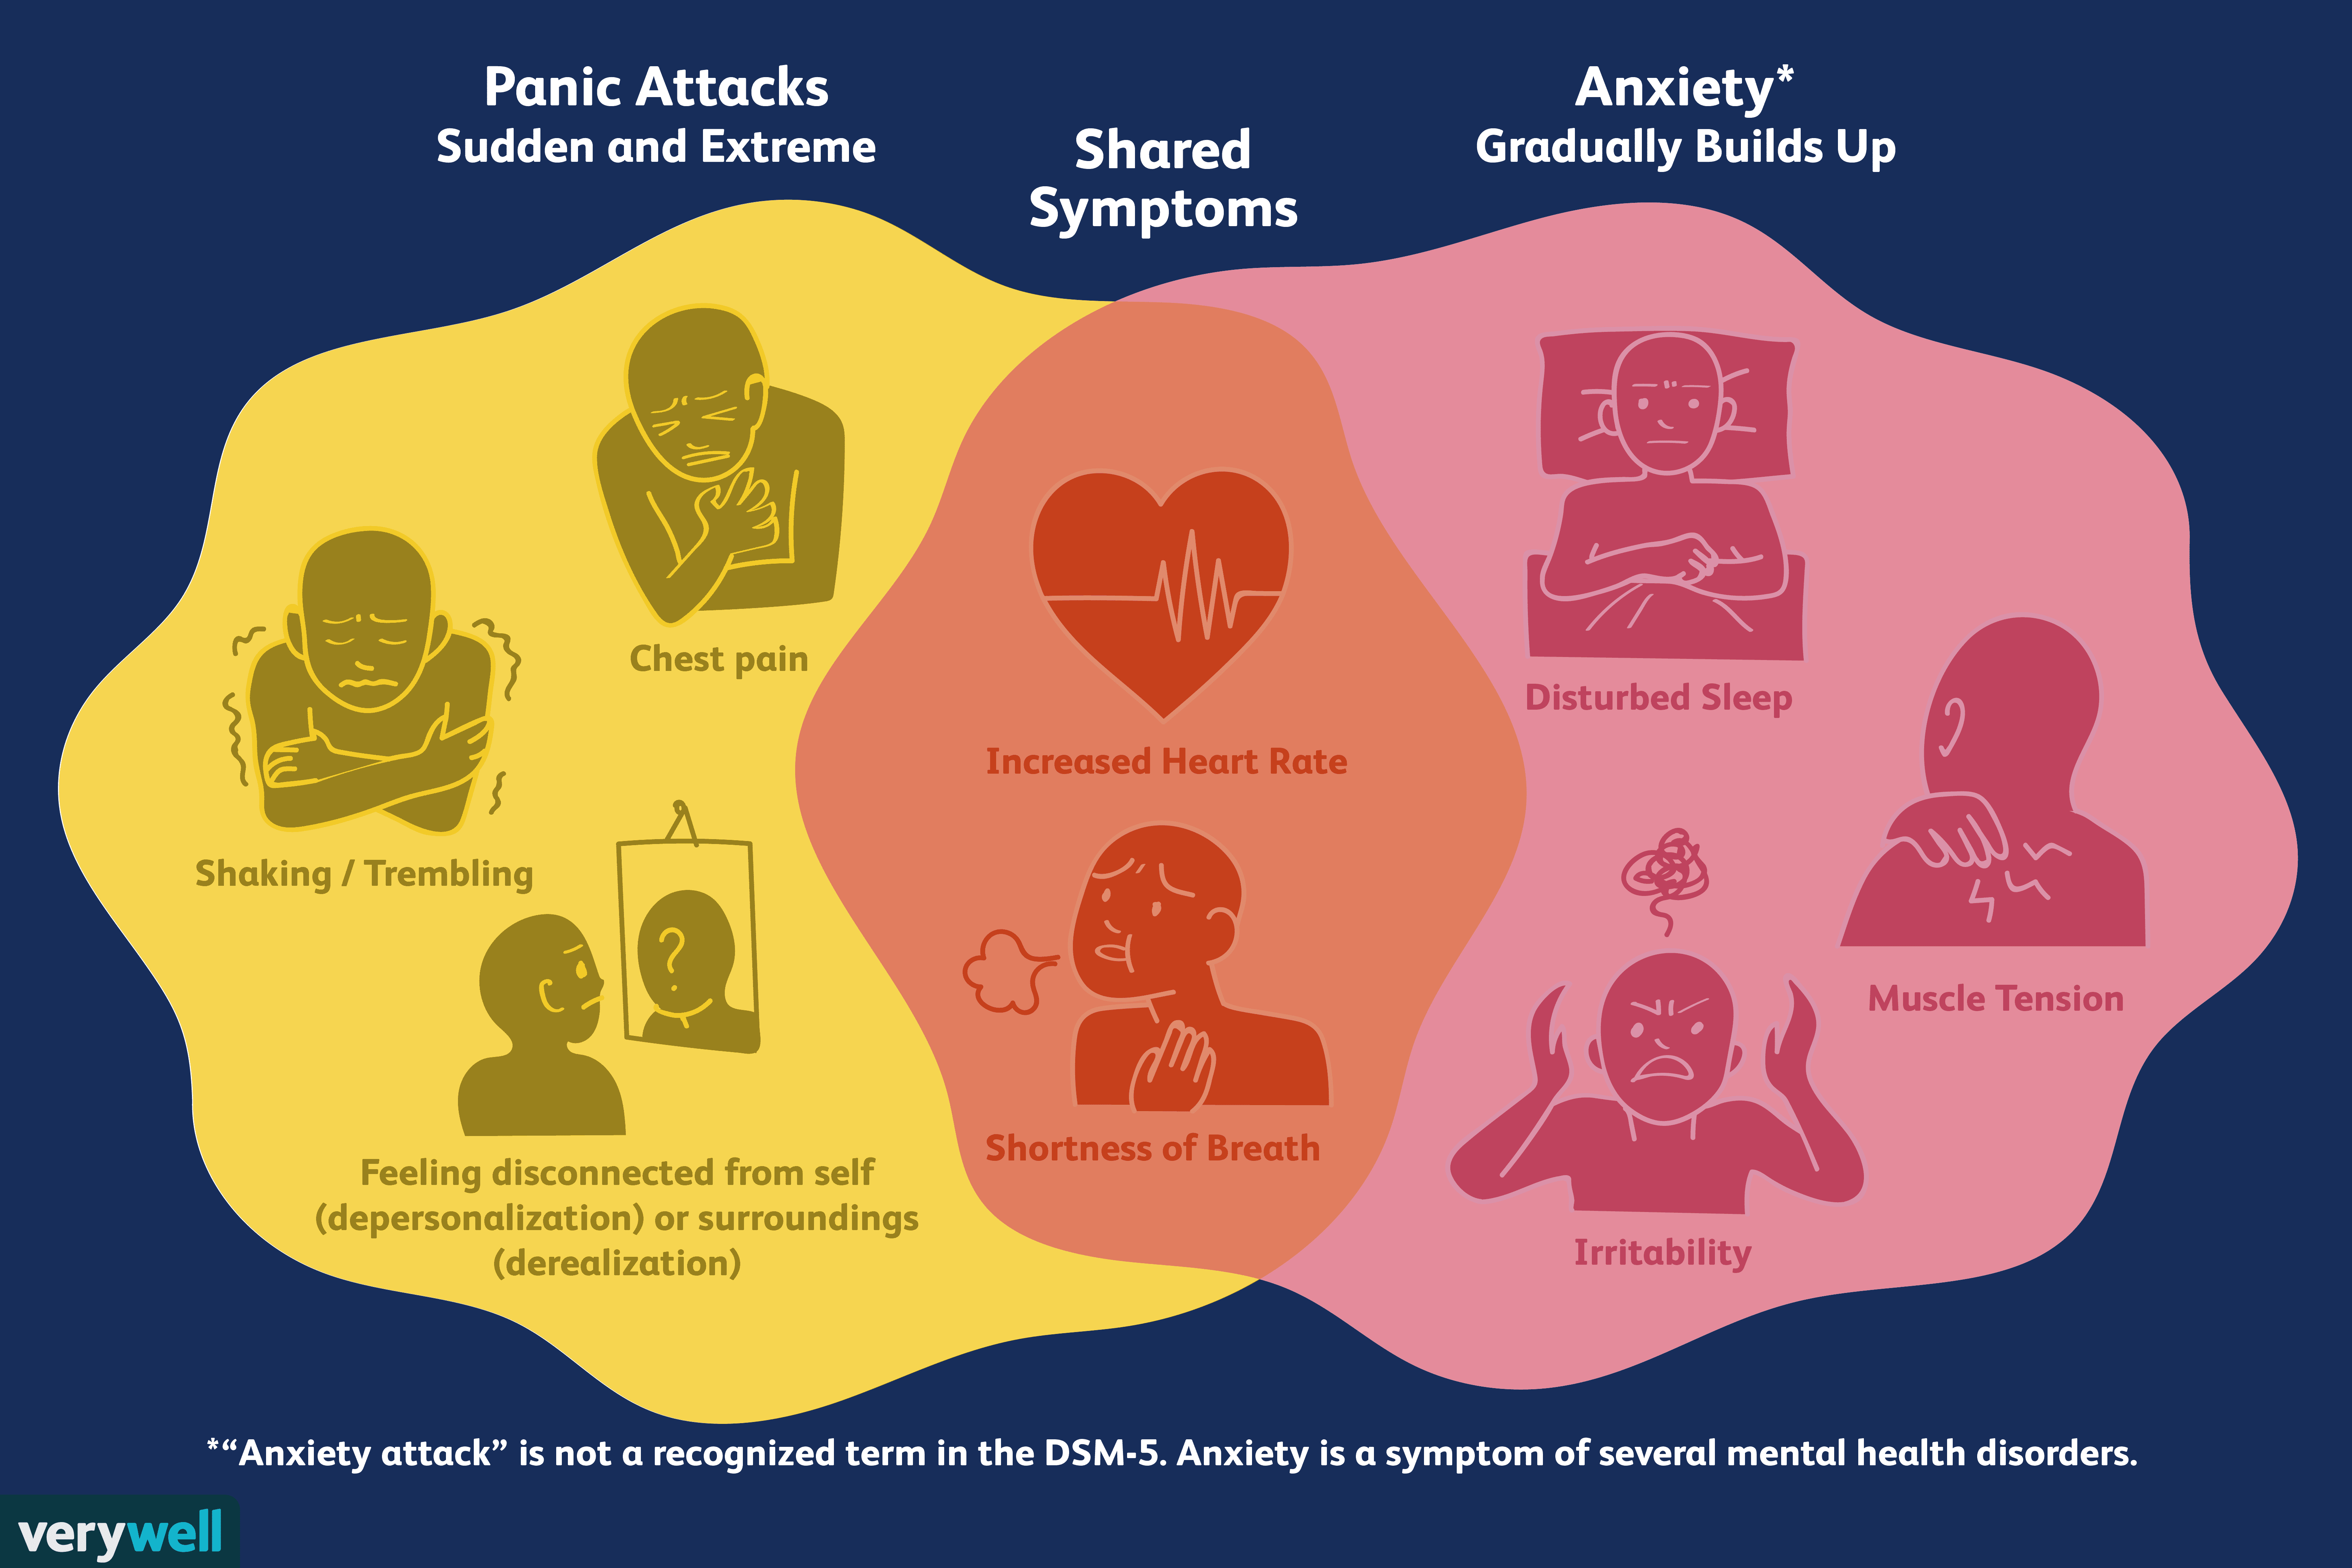 How Anxiety and Panic Attacks Differ